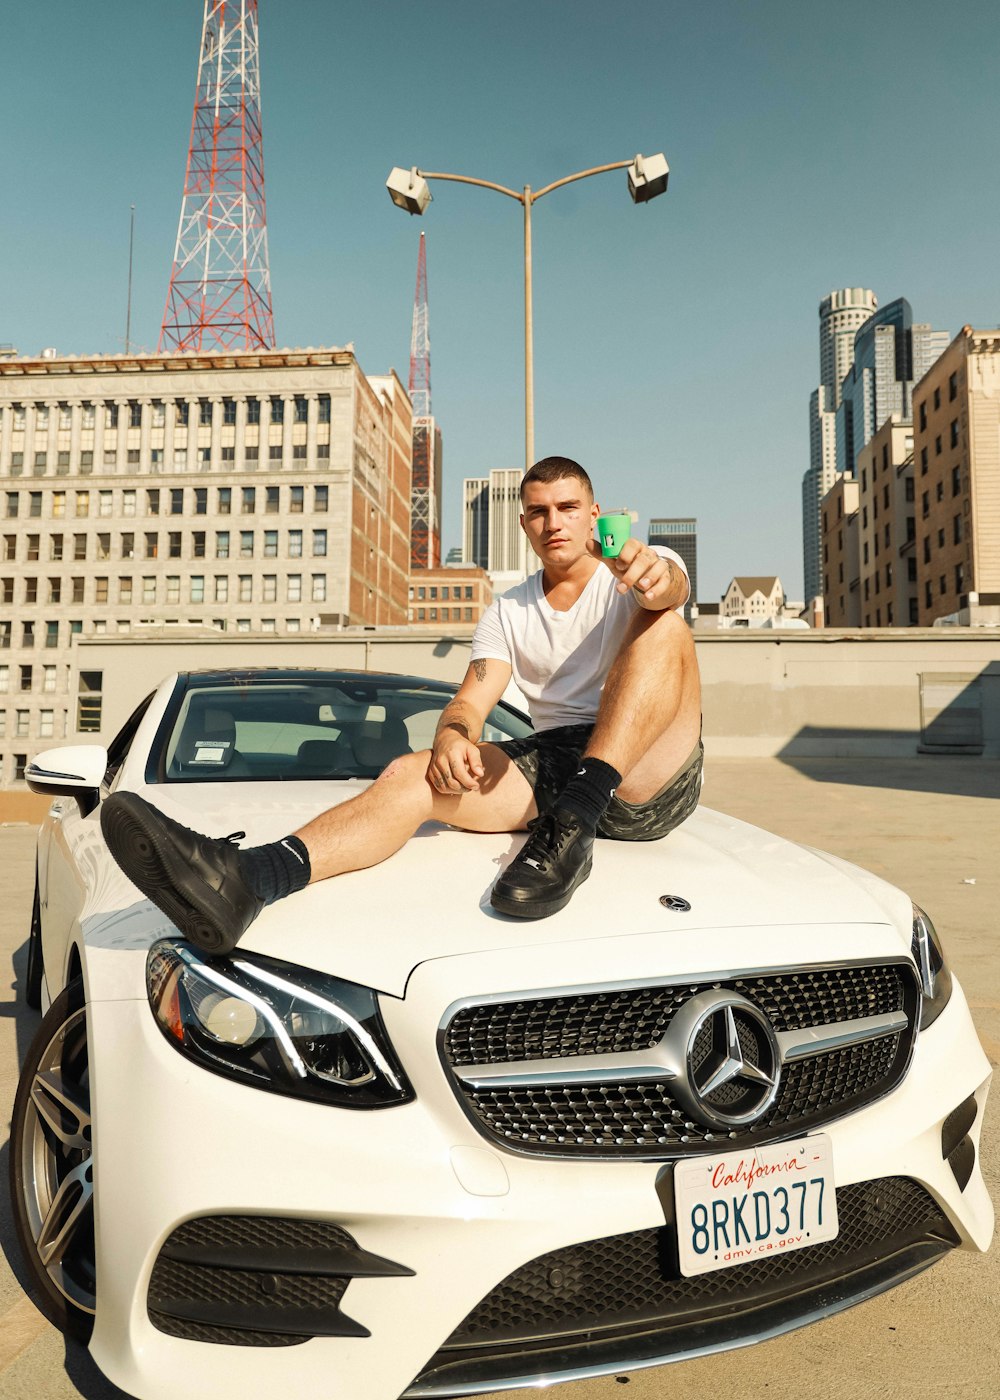 man in white t-shirt and black pants sitting on white car